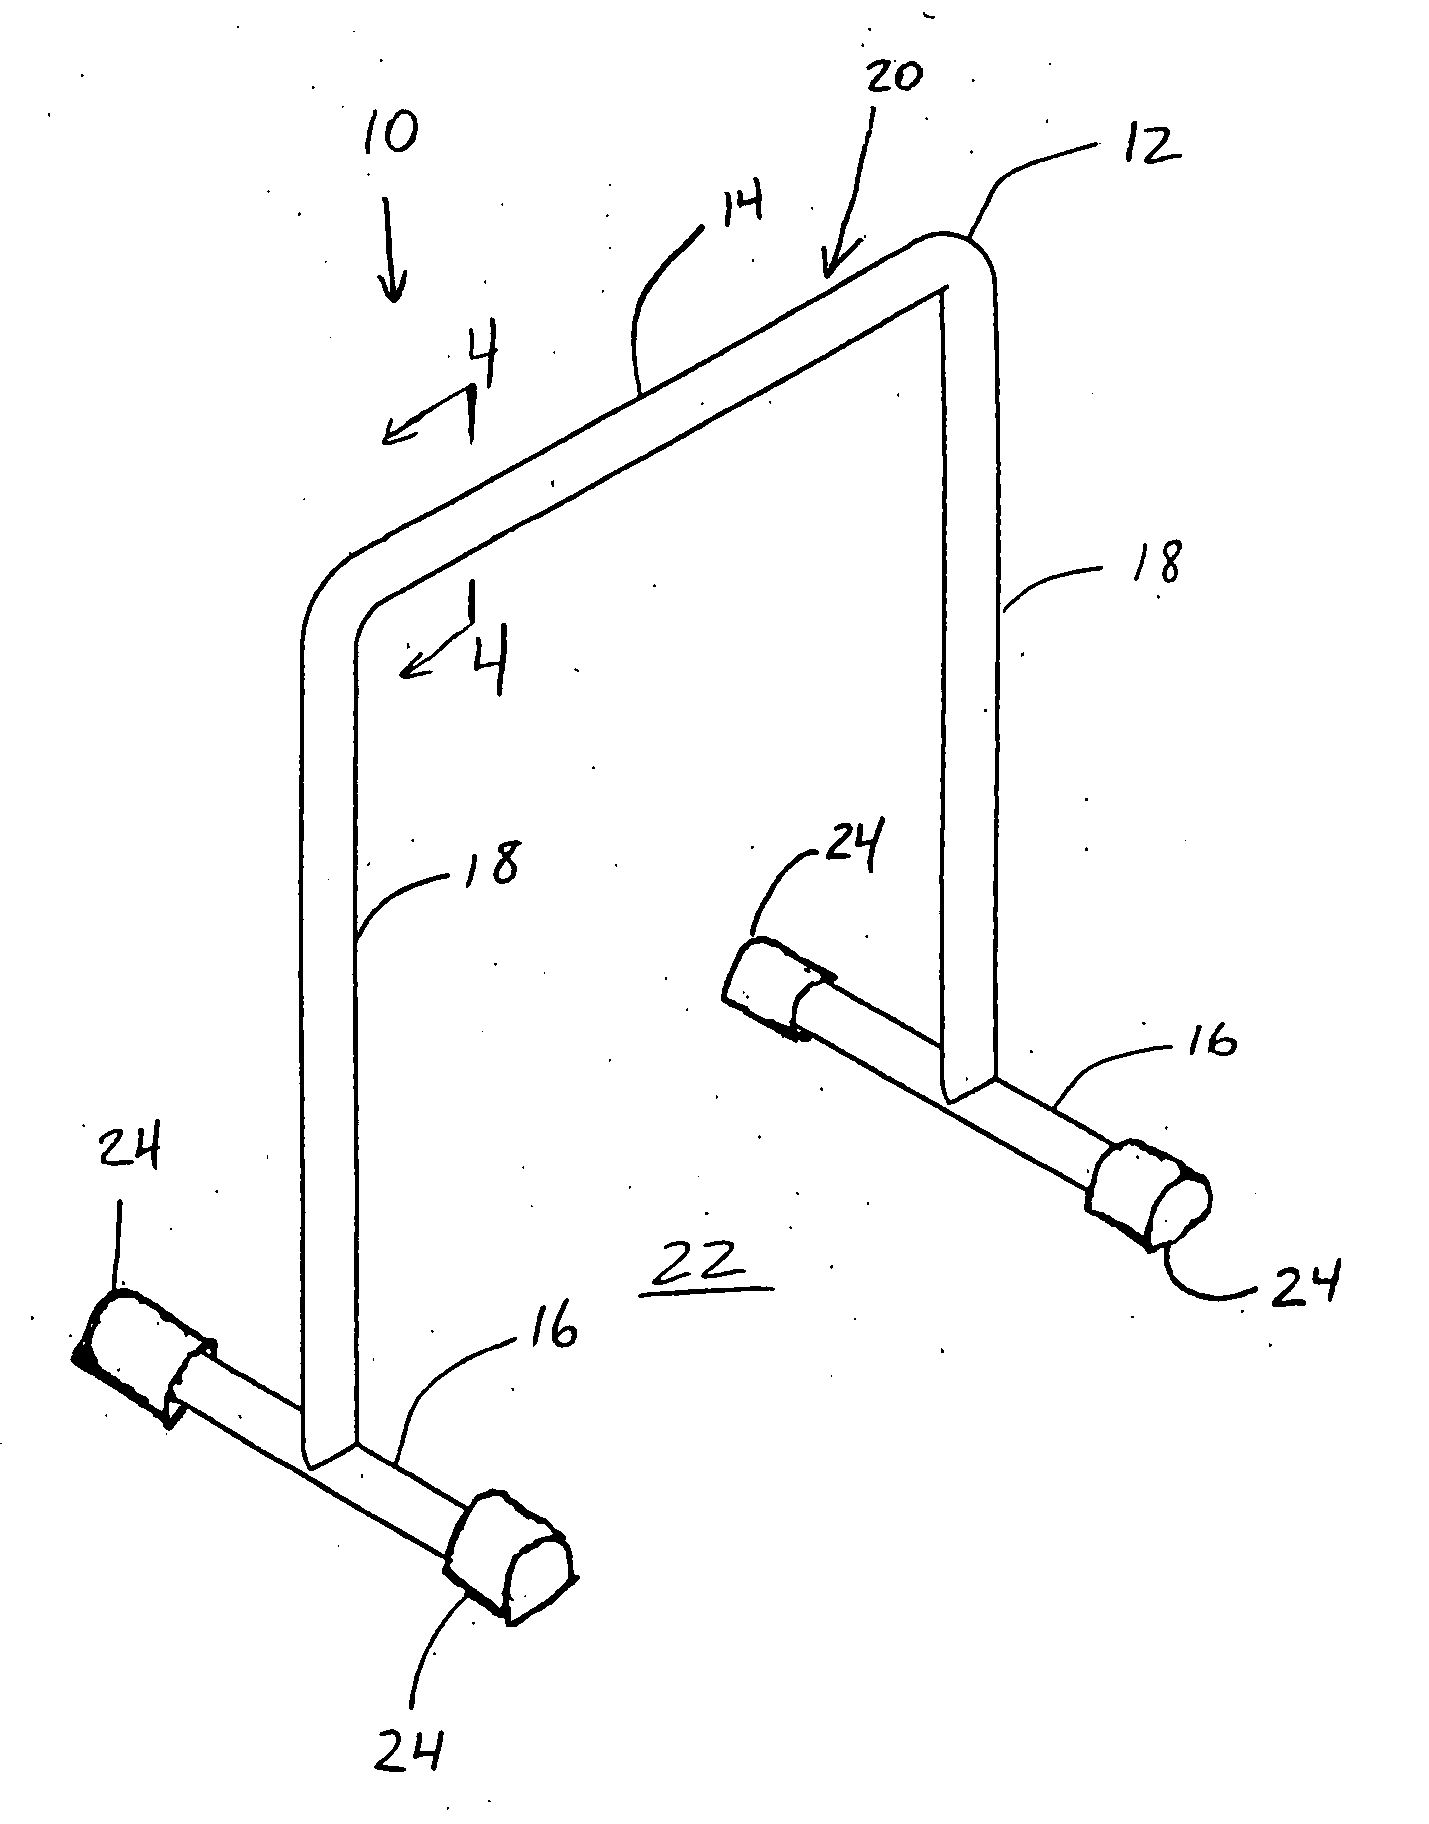 Exercise device and system